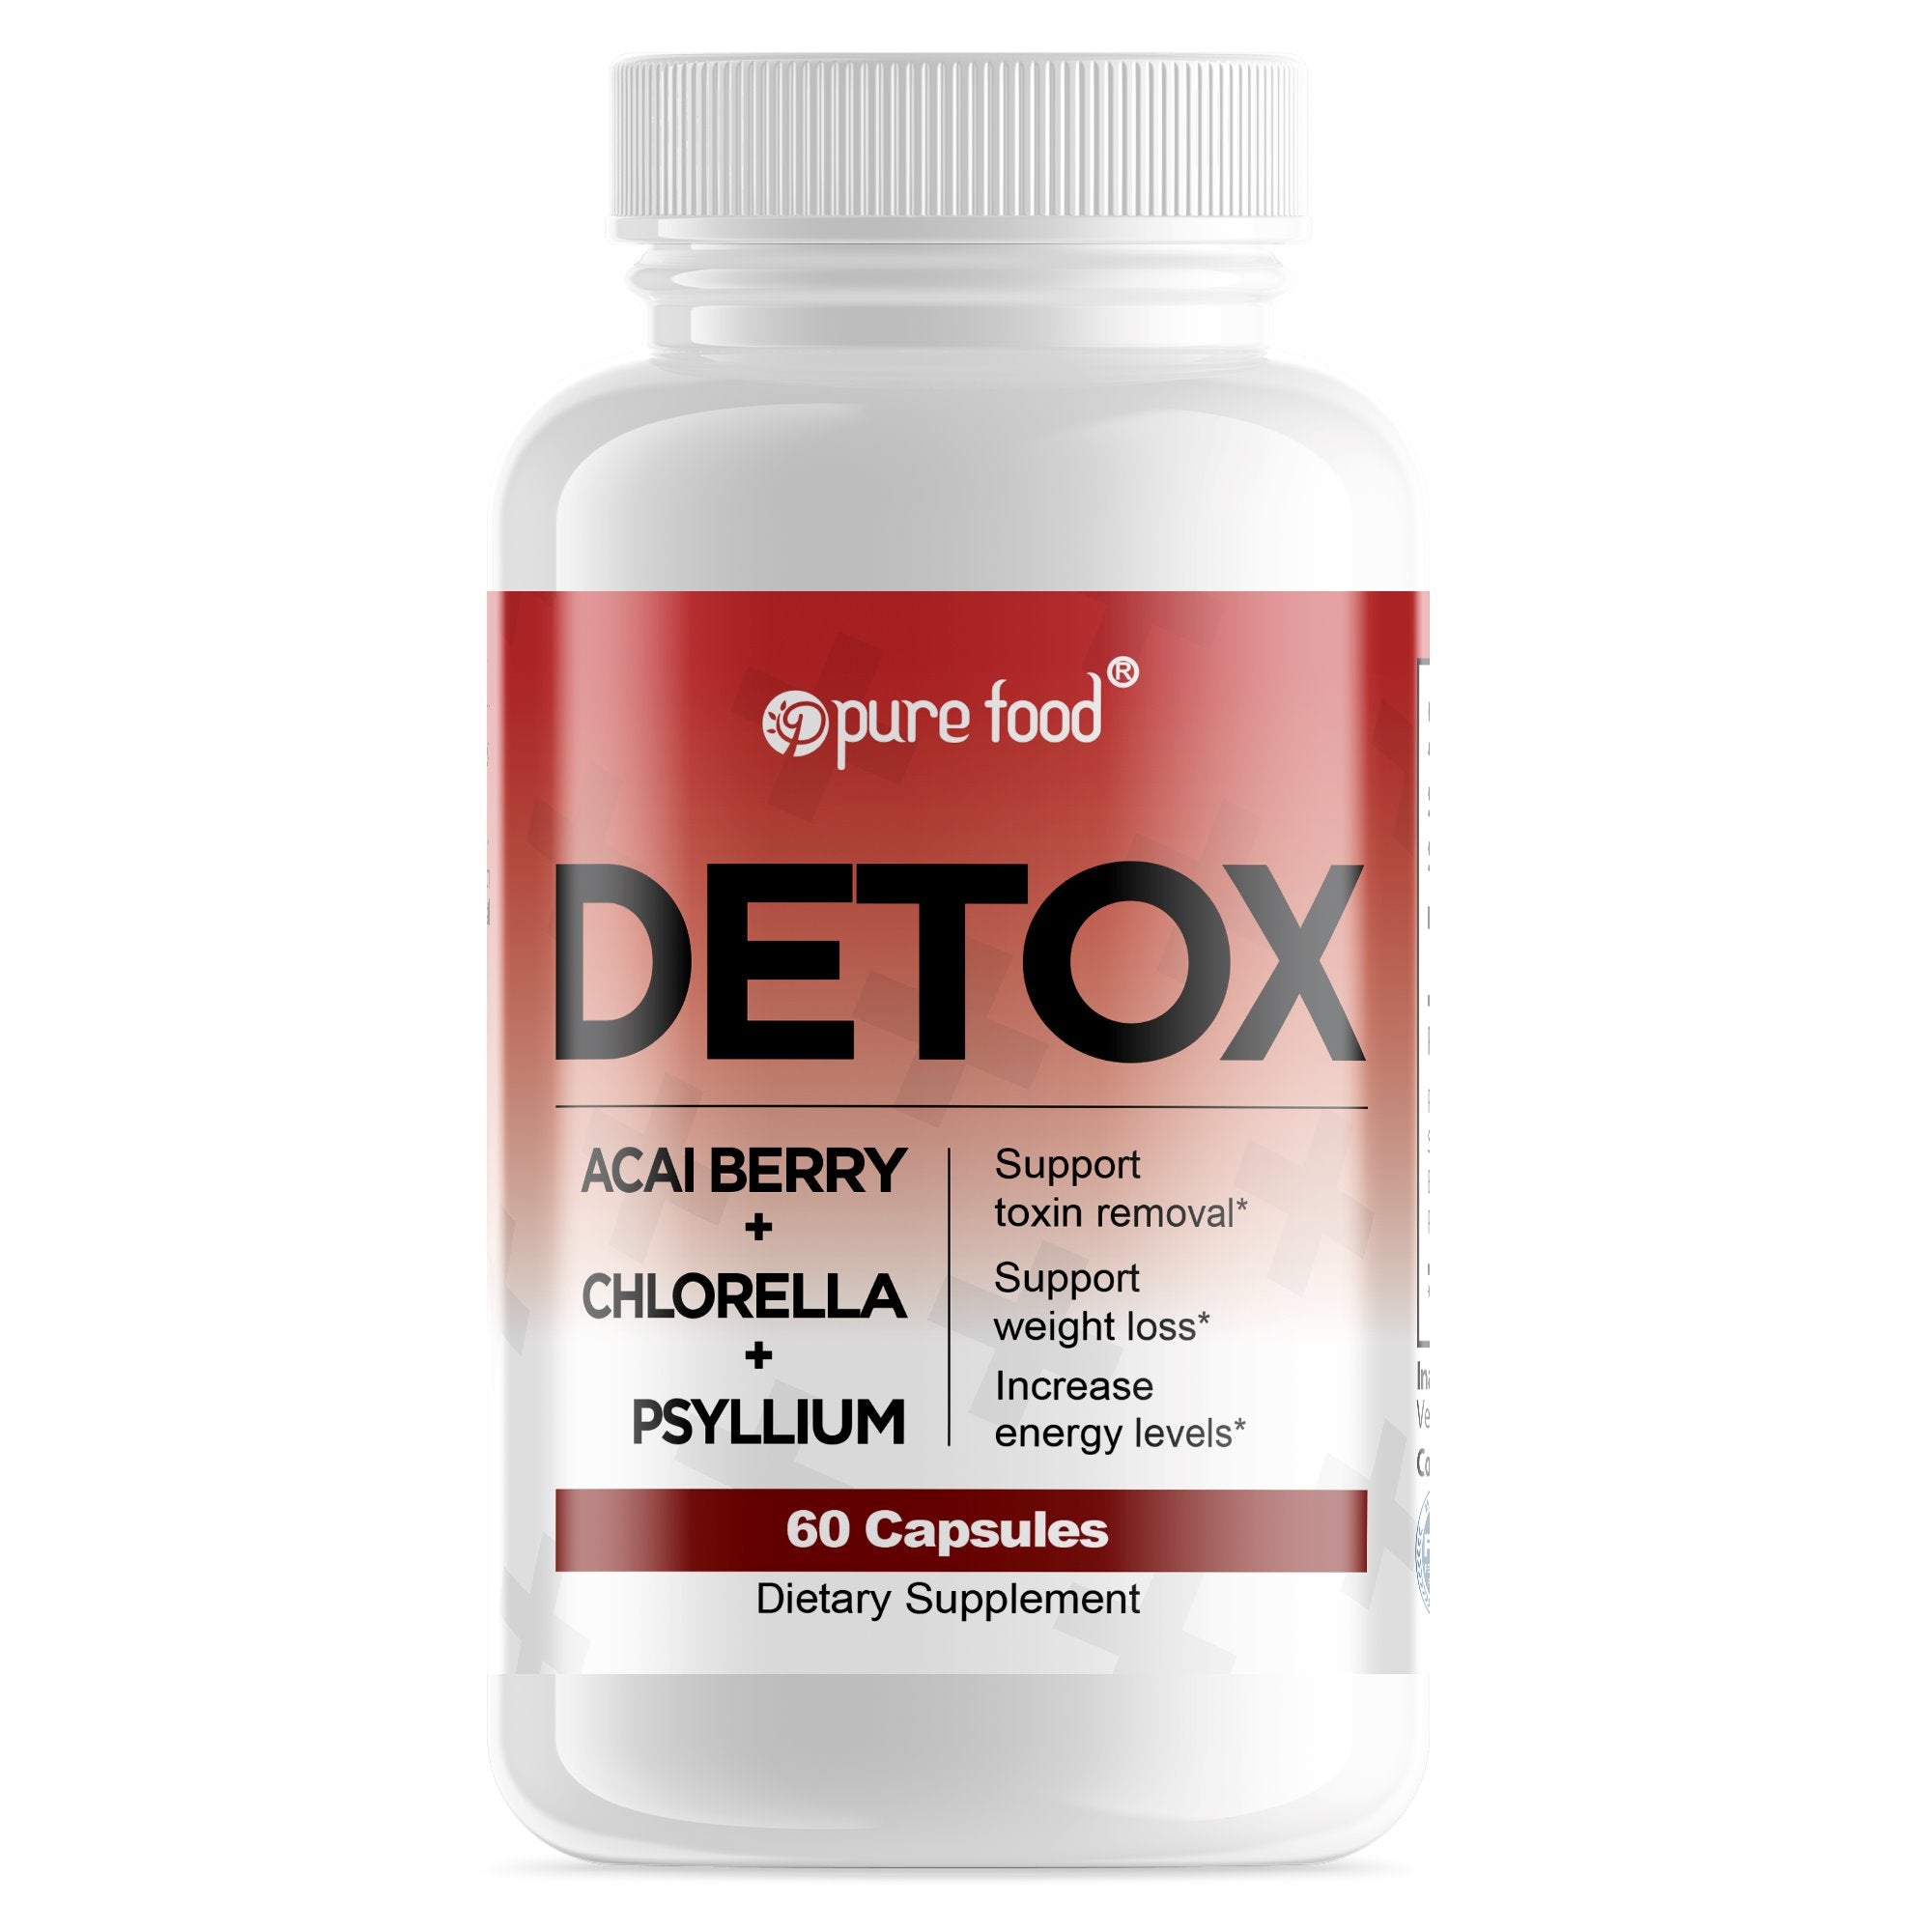 Pure Food DETOX - 60 Capsules Weight loss Pure Food Digestive Health 